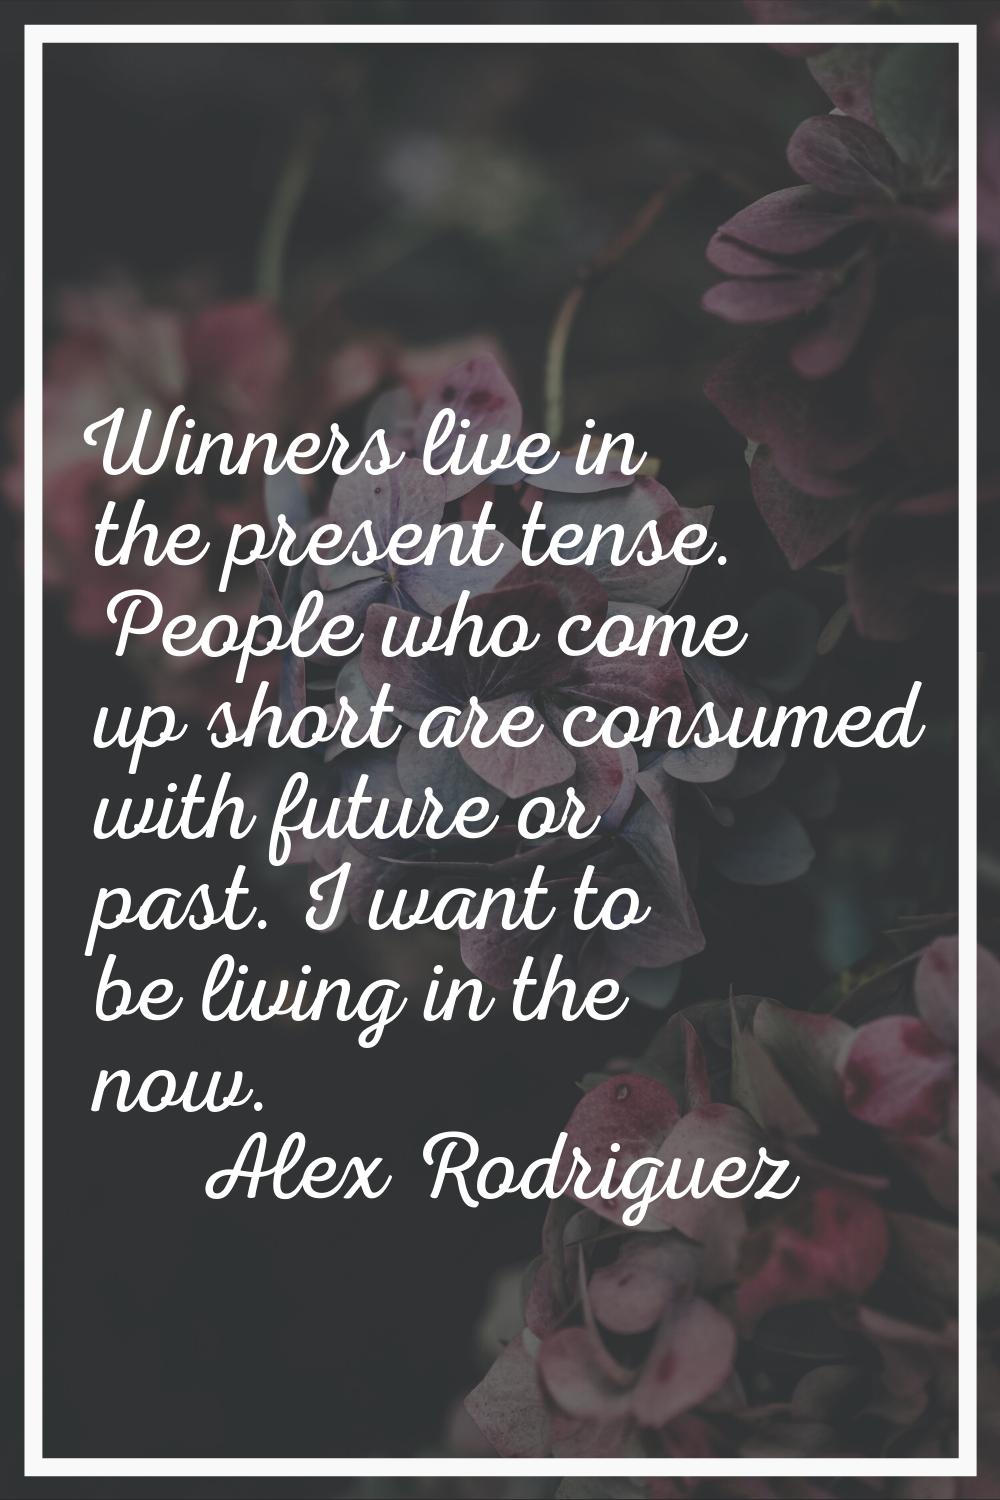 Winners live in the present tense. People who come up short are consumed with future or past. I wan